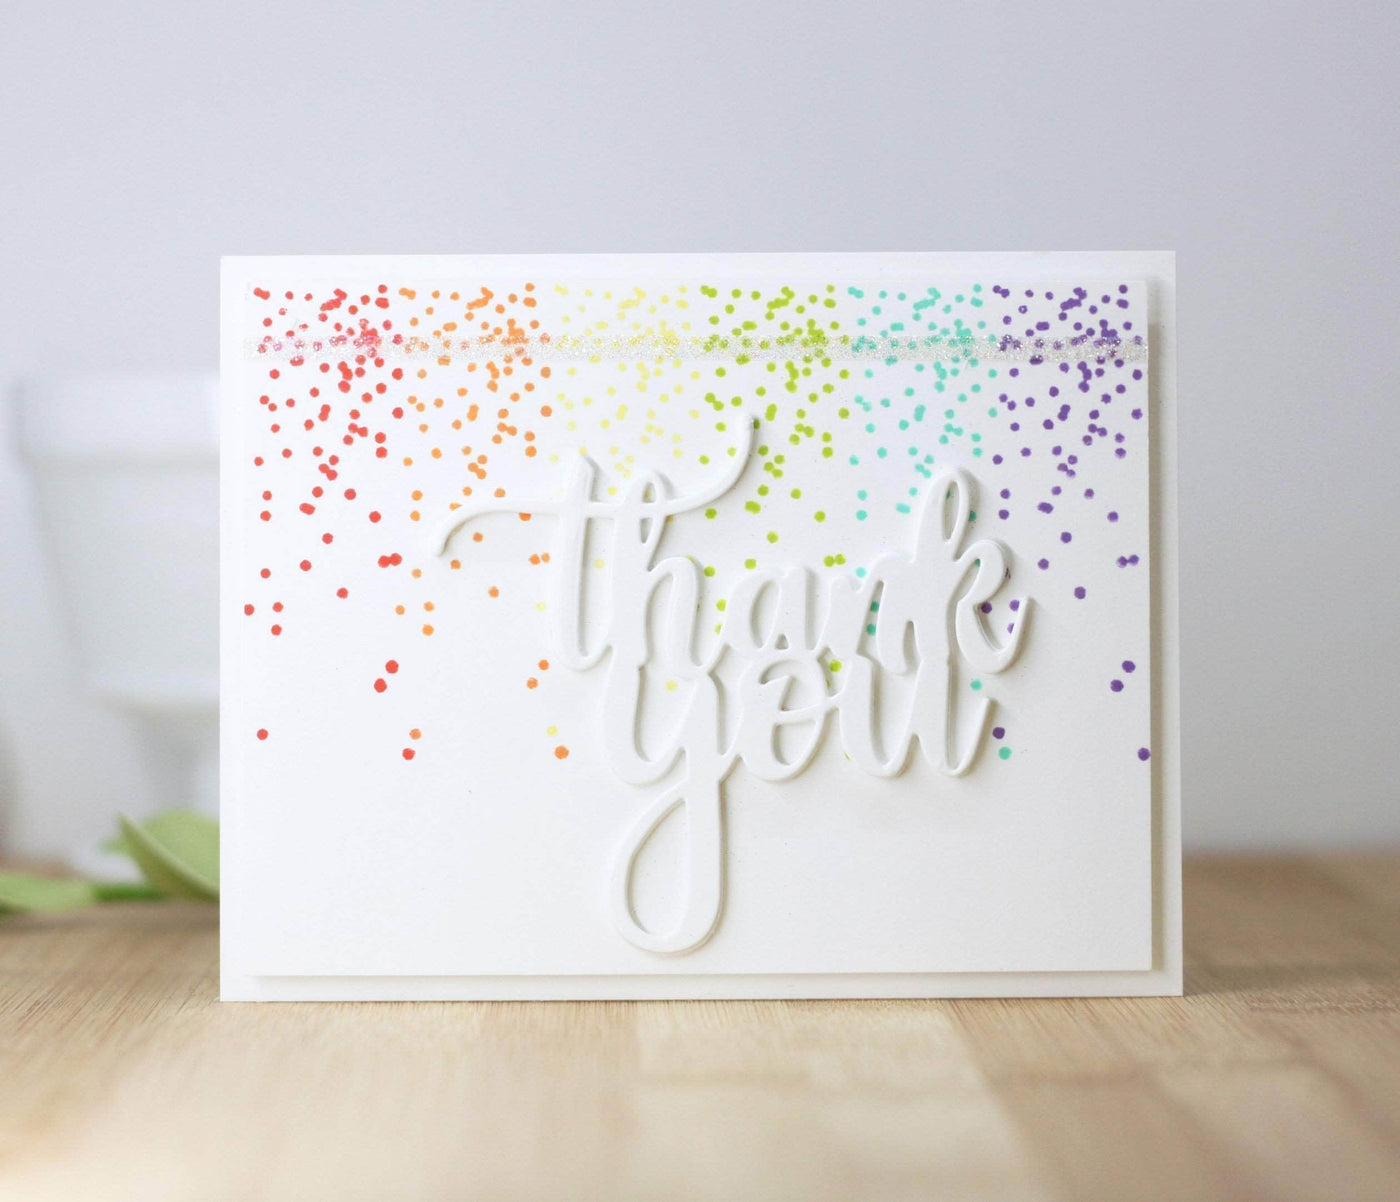 Photocentric Clear Stamps Kind Confetti Stamp Set